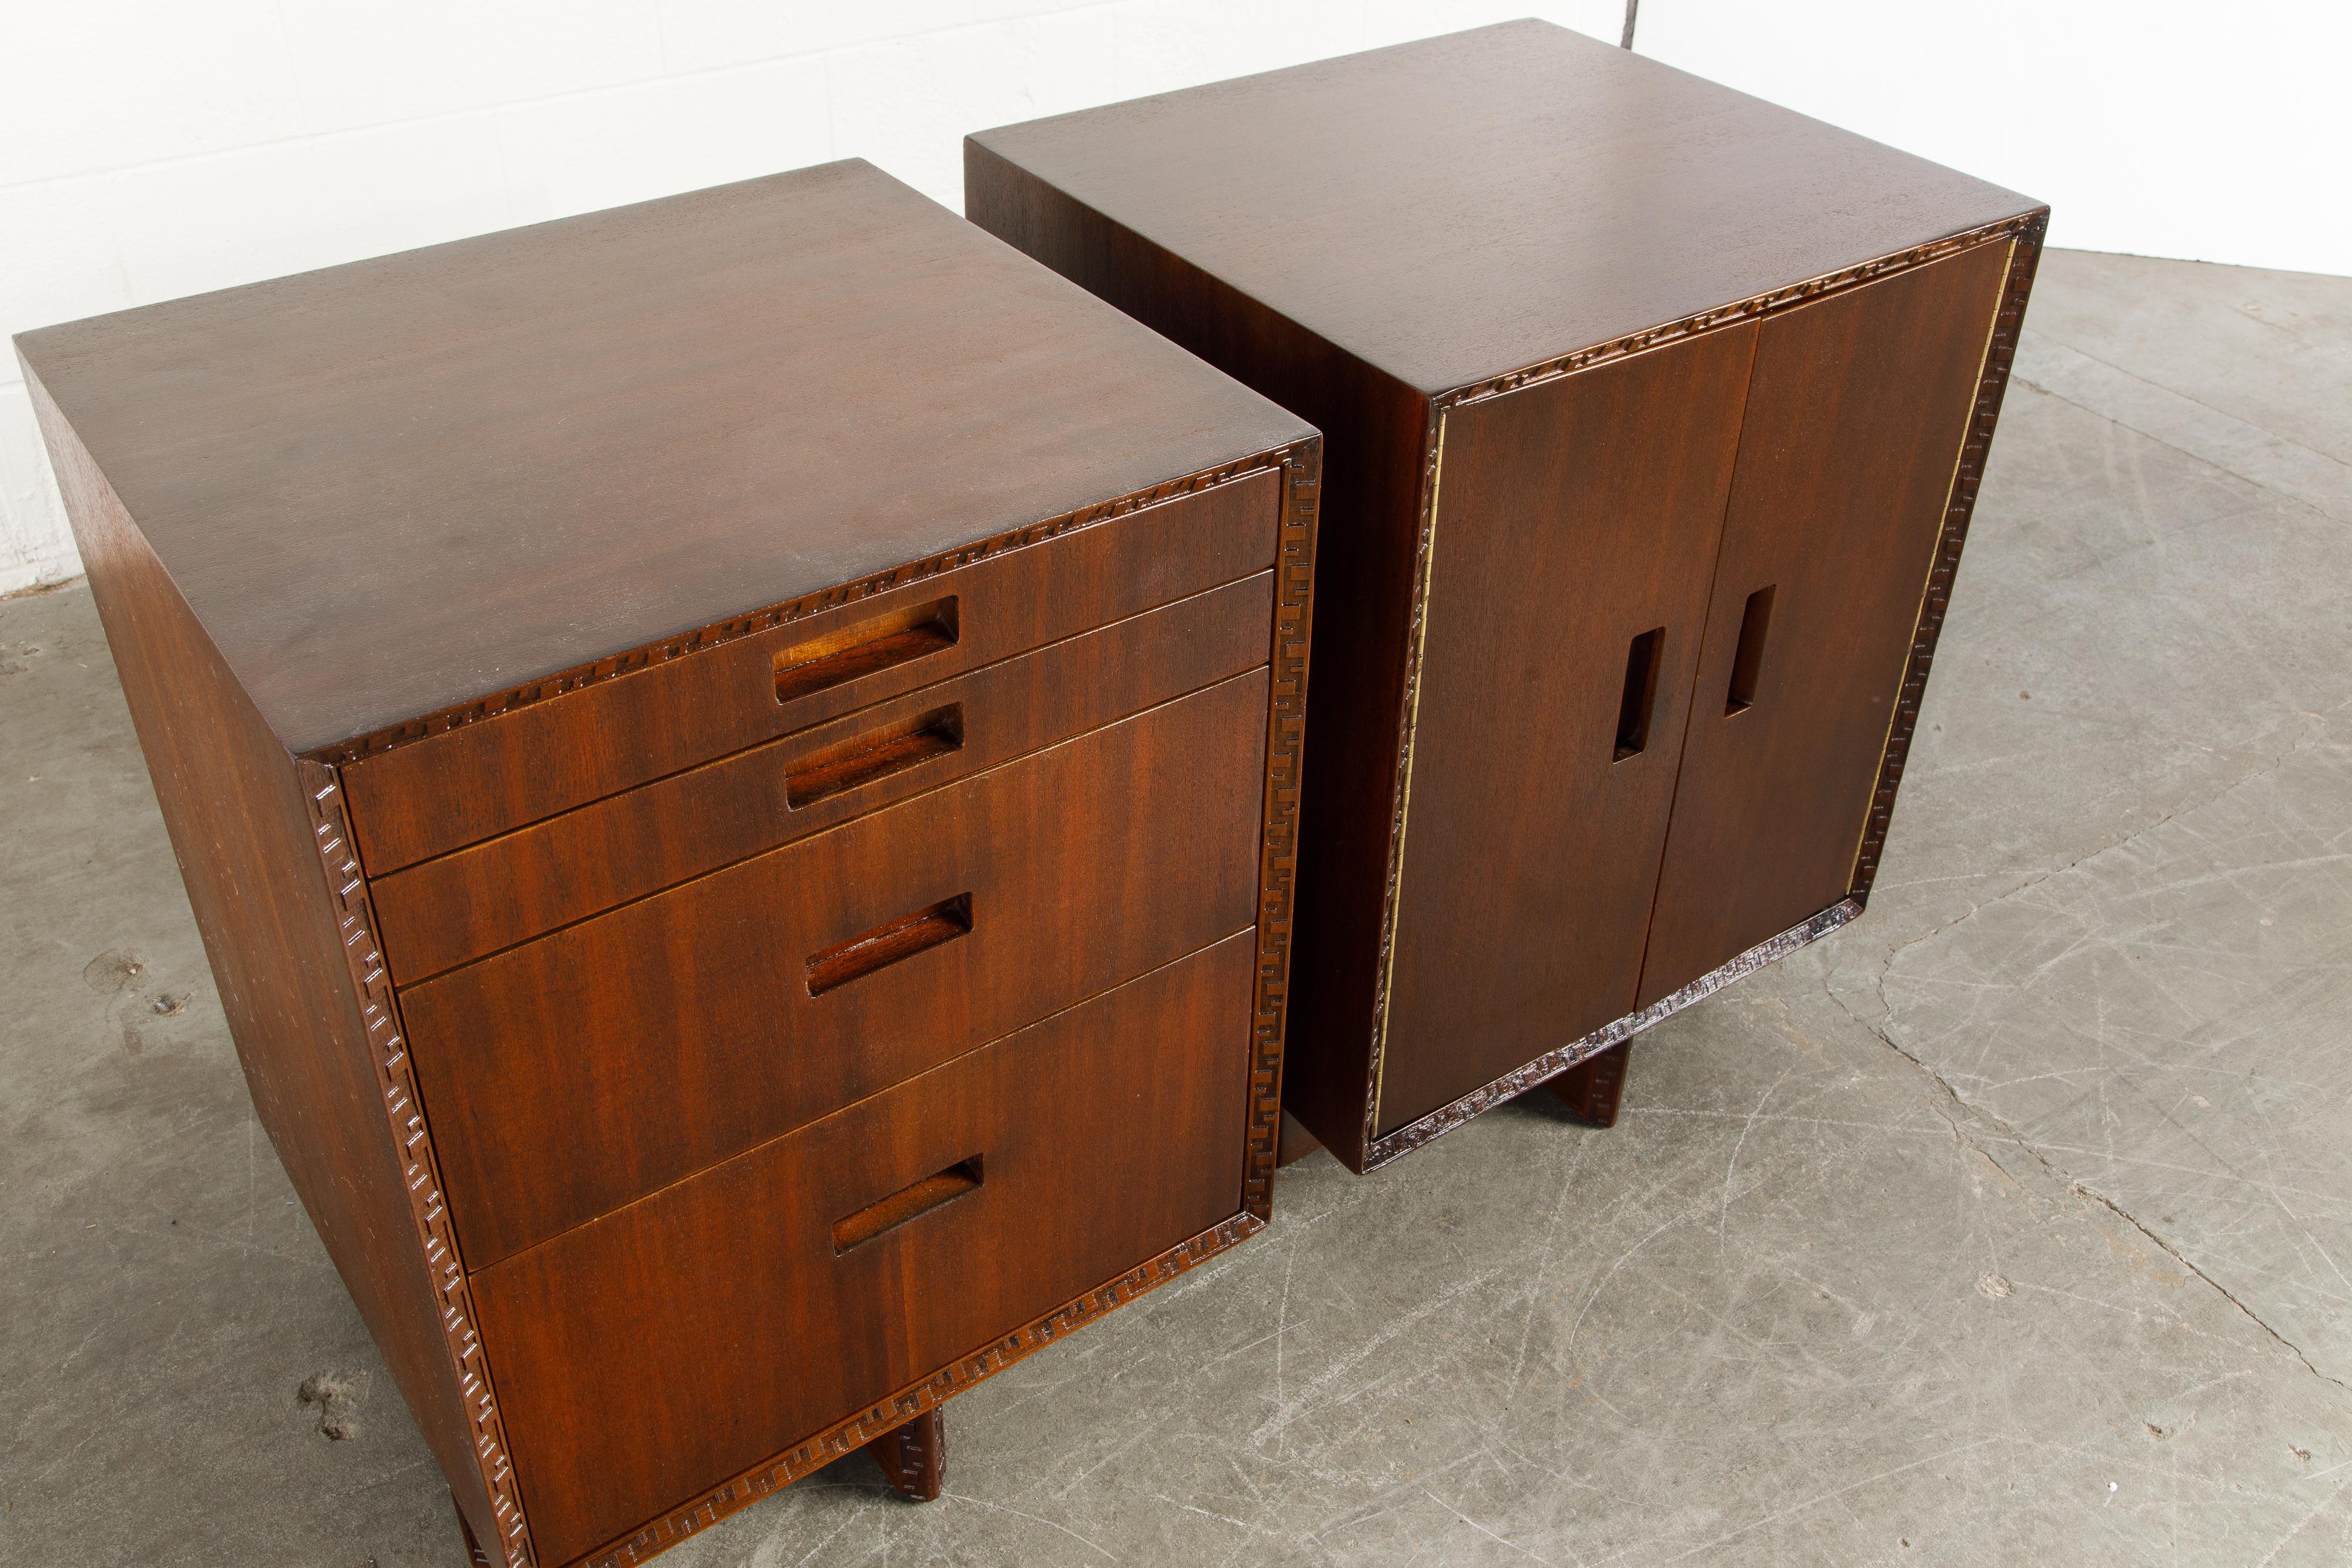 'Taliesin' Collection Mahogany Cabinets by Frank Lloyd Wright, 1955, Signed 4